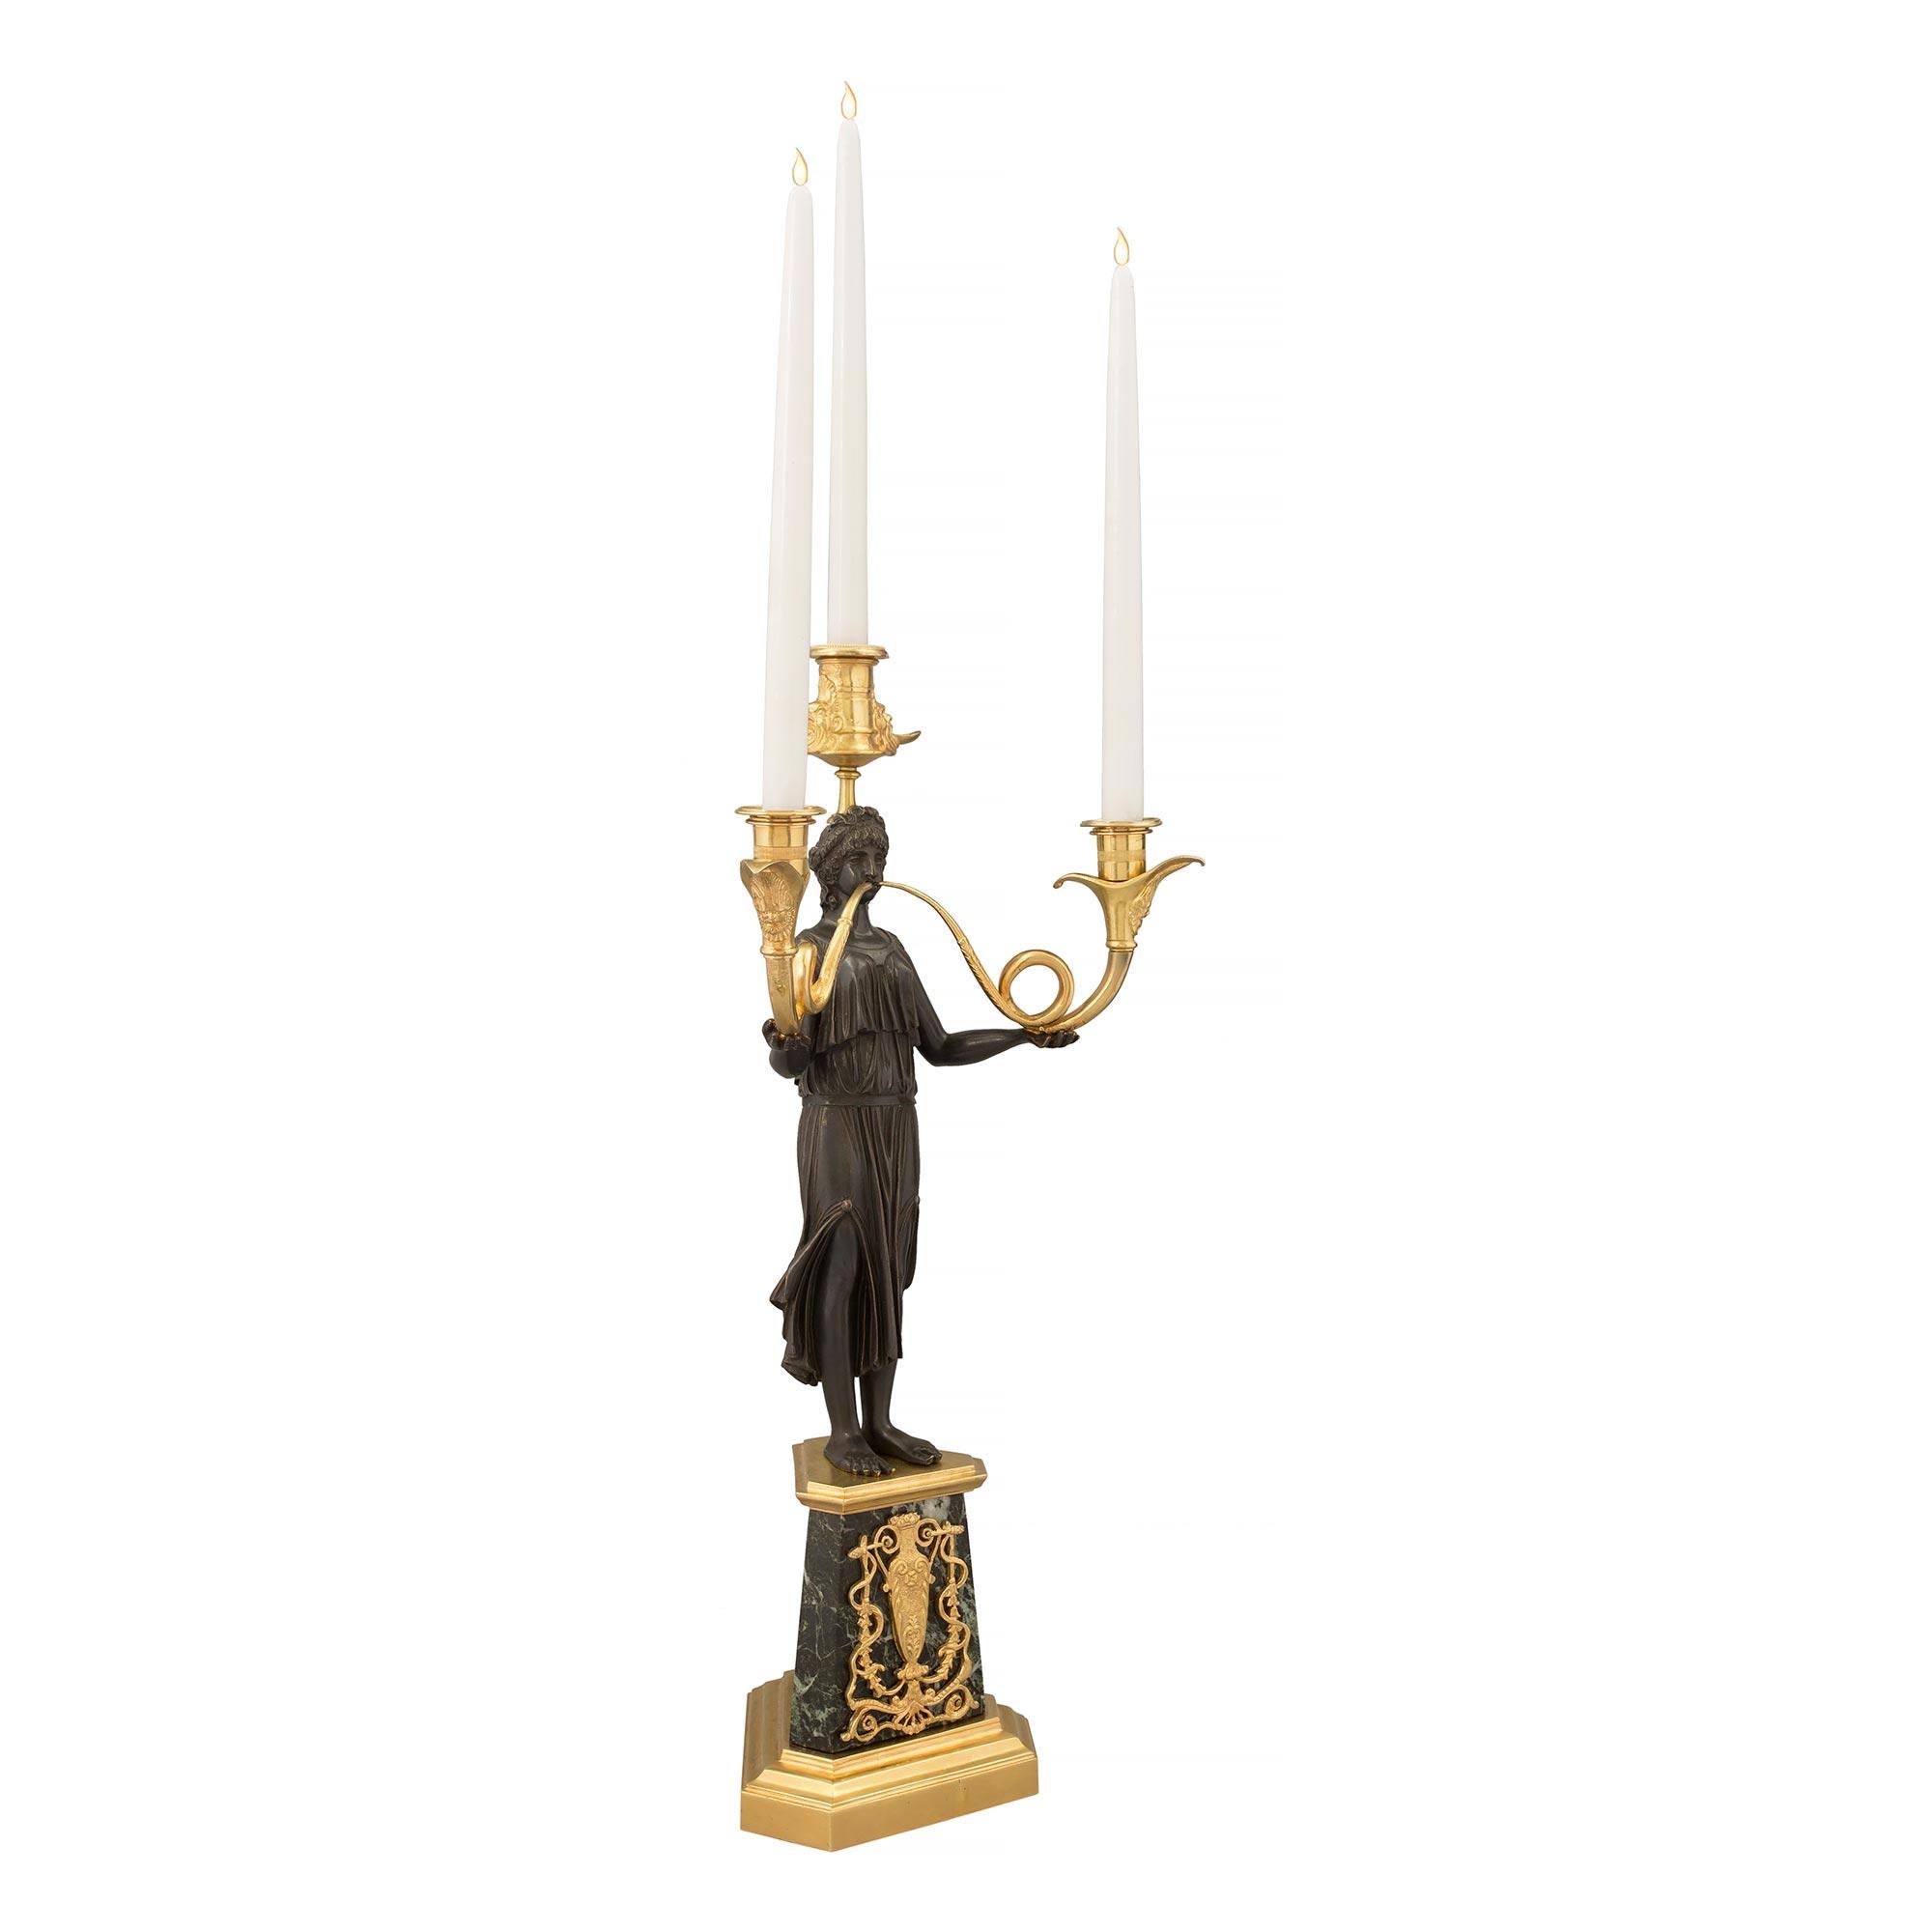 An extremely elegant and high quality pair of French 19th century Neo-Classical st. patinated bronze, ormolu and marble, three arm candelabras. Each candelabra is raised by a triangular ormolu base with cut corners and a fine stepped design. The